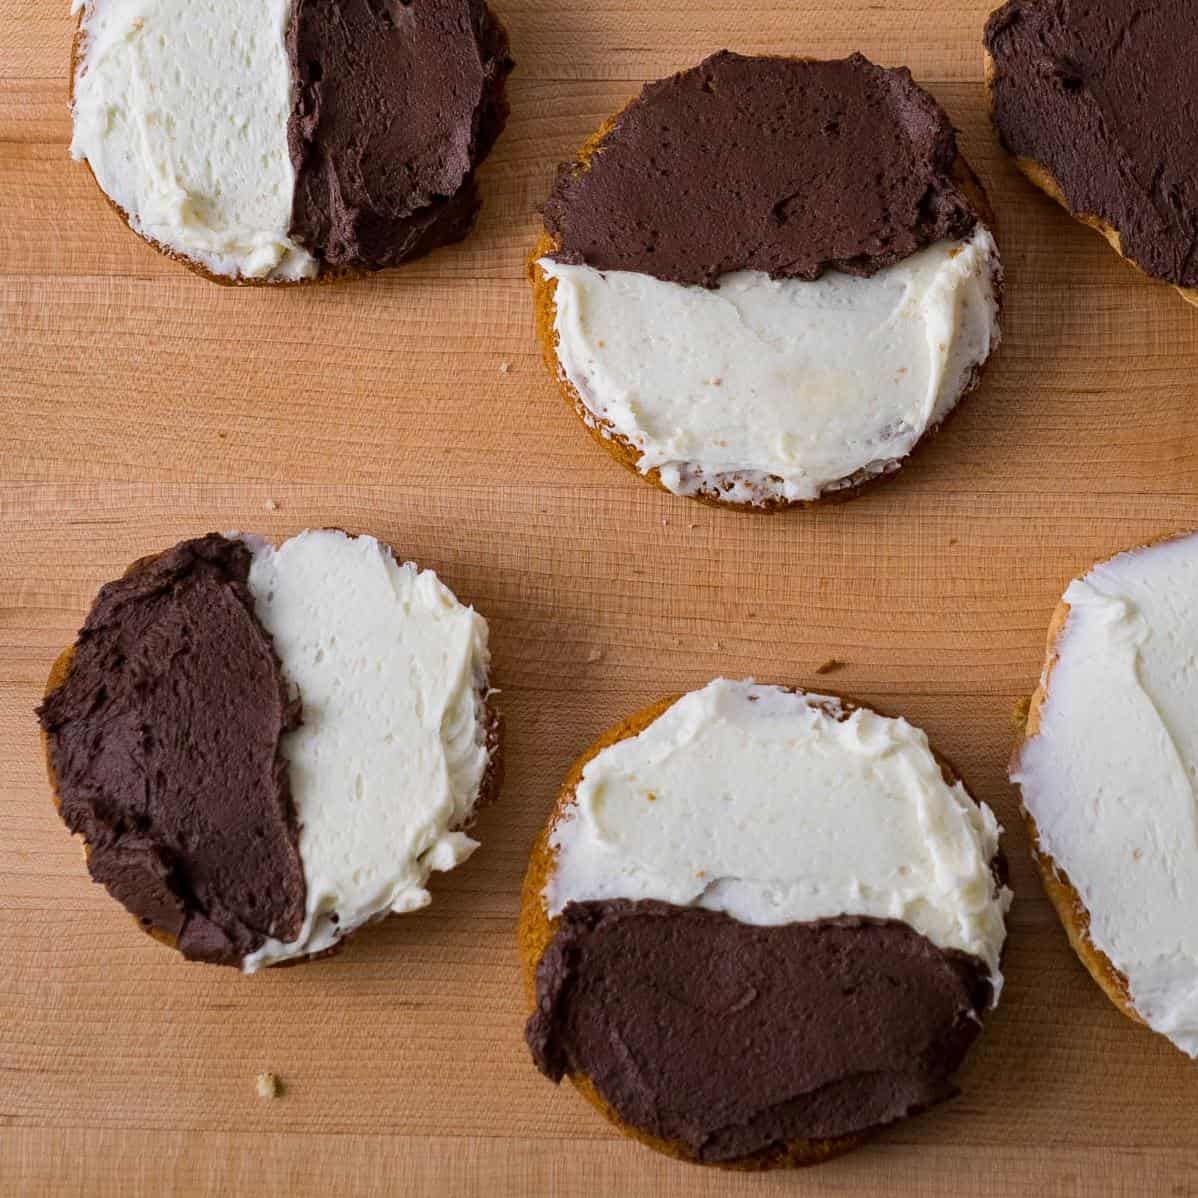  These Half Moon Cookies are the perfect treat for any occasion!